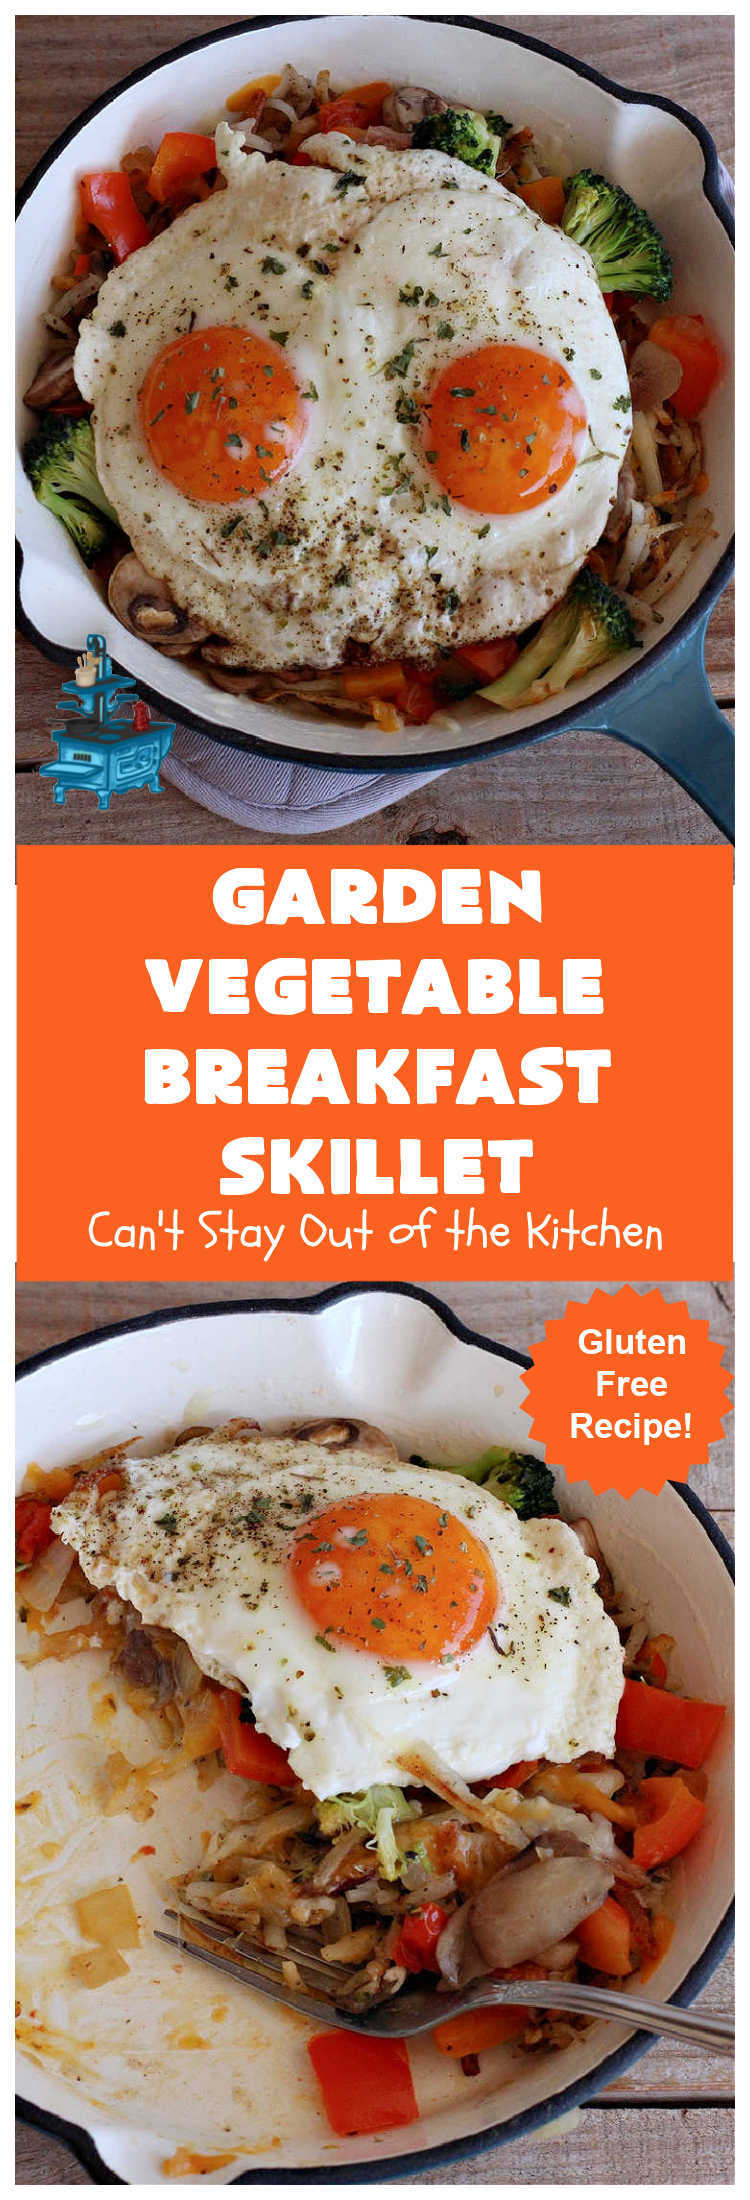 Garden Vegetable Breakfast Skillet | Can't Stay Out of the Kitchen | this delectable #BreakfastSkillet includes seasoned #HashBrowns, #MontereyJack & #CheddarCheese, several garden #vegetables including #mushrooms & #broccoli & it's topped with two #eggs. It's a fantastic hearty #breakfast for weekends, company or #holidays. #vegetarian #GlutenFree #VegetarianBreakfastSkillet #GardenVegetableBreakfastSkillet #HolidayBreakfast